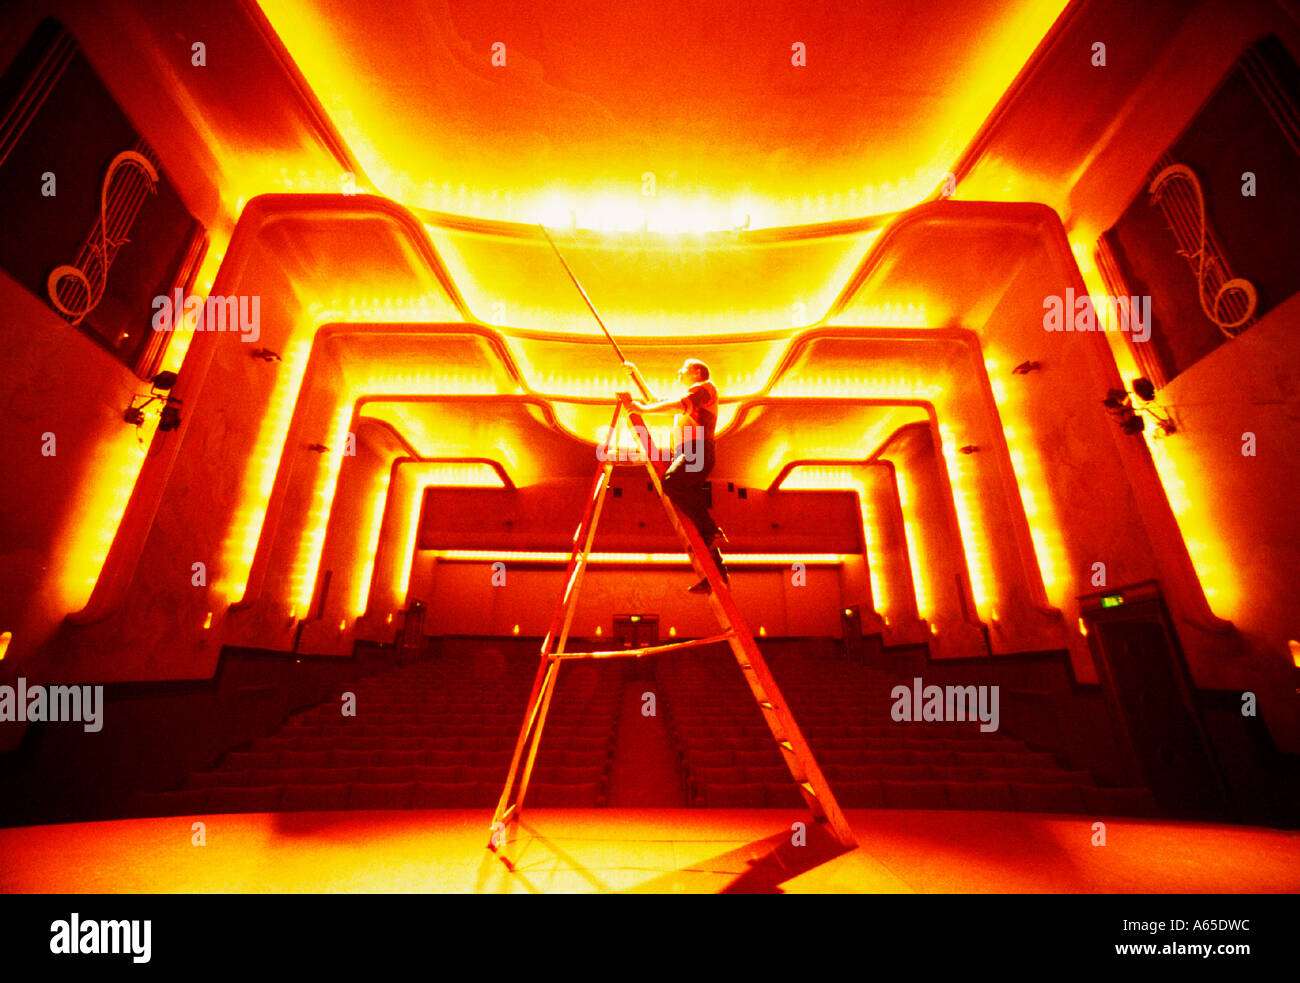 Theater-Manager Jeremy Höhle passt die Beleuchtung in privaten 1938 Art-Deco-Theater von Stanford Hall, Nottinghamshire. Stockfoto